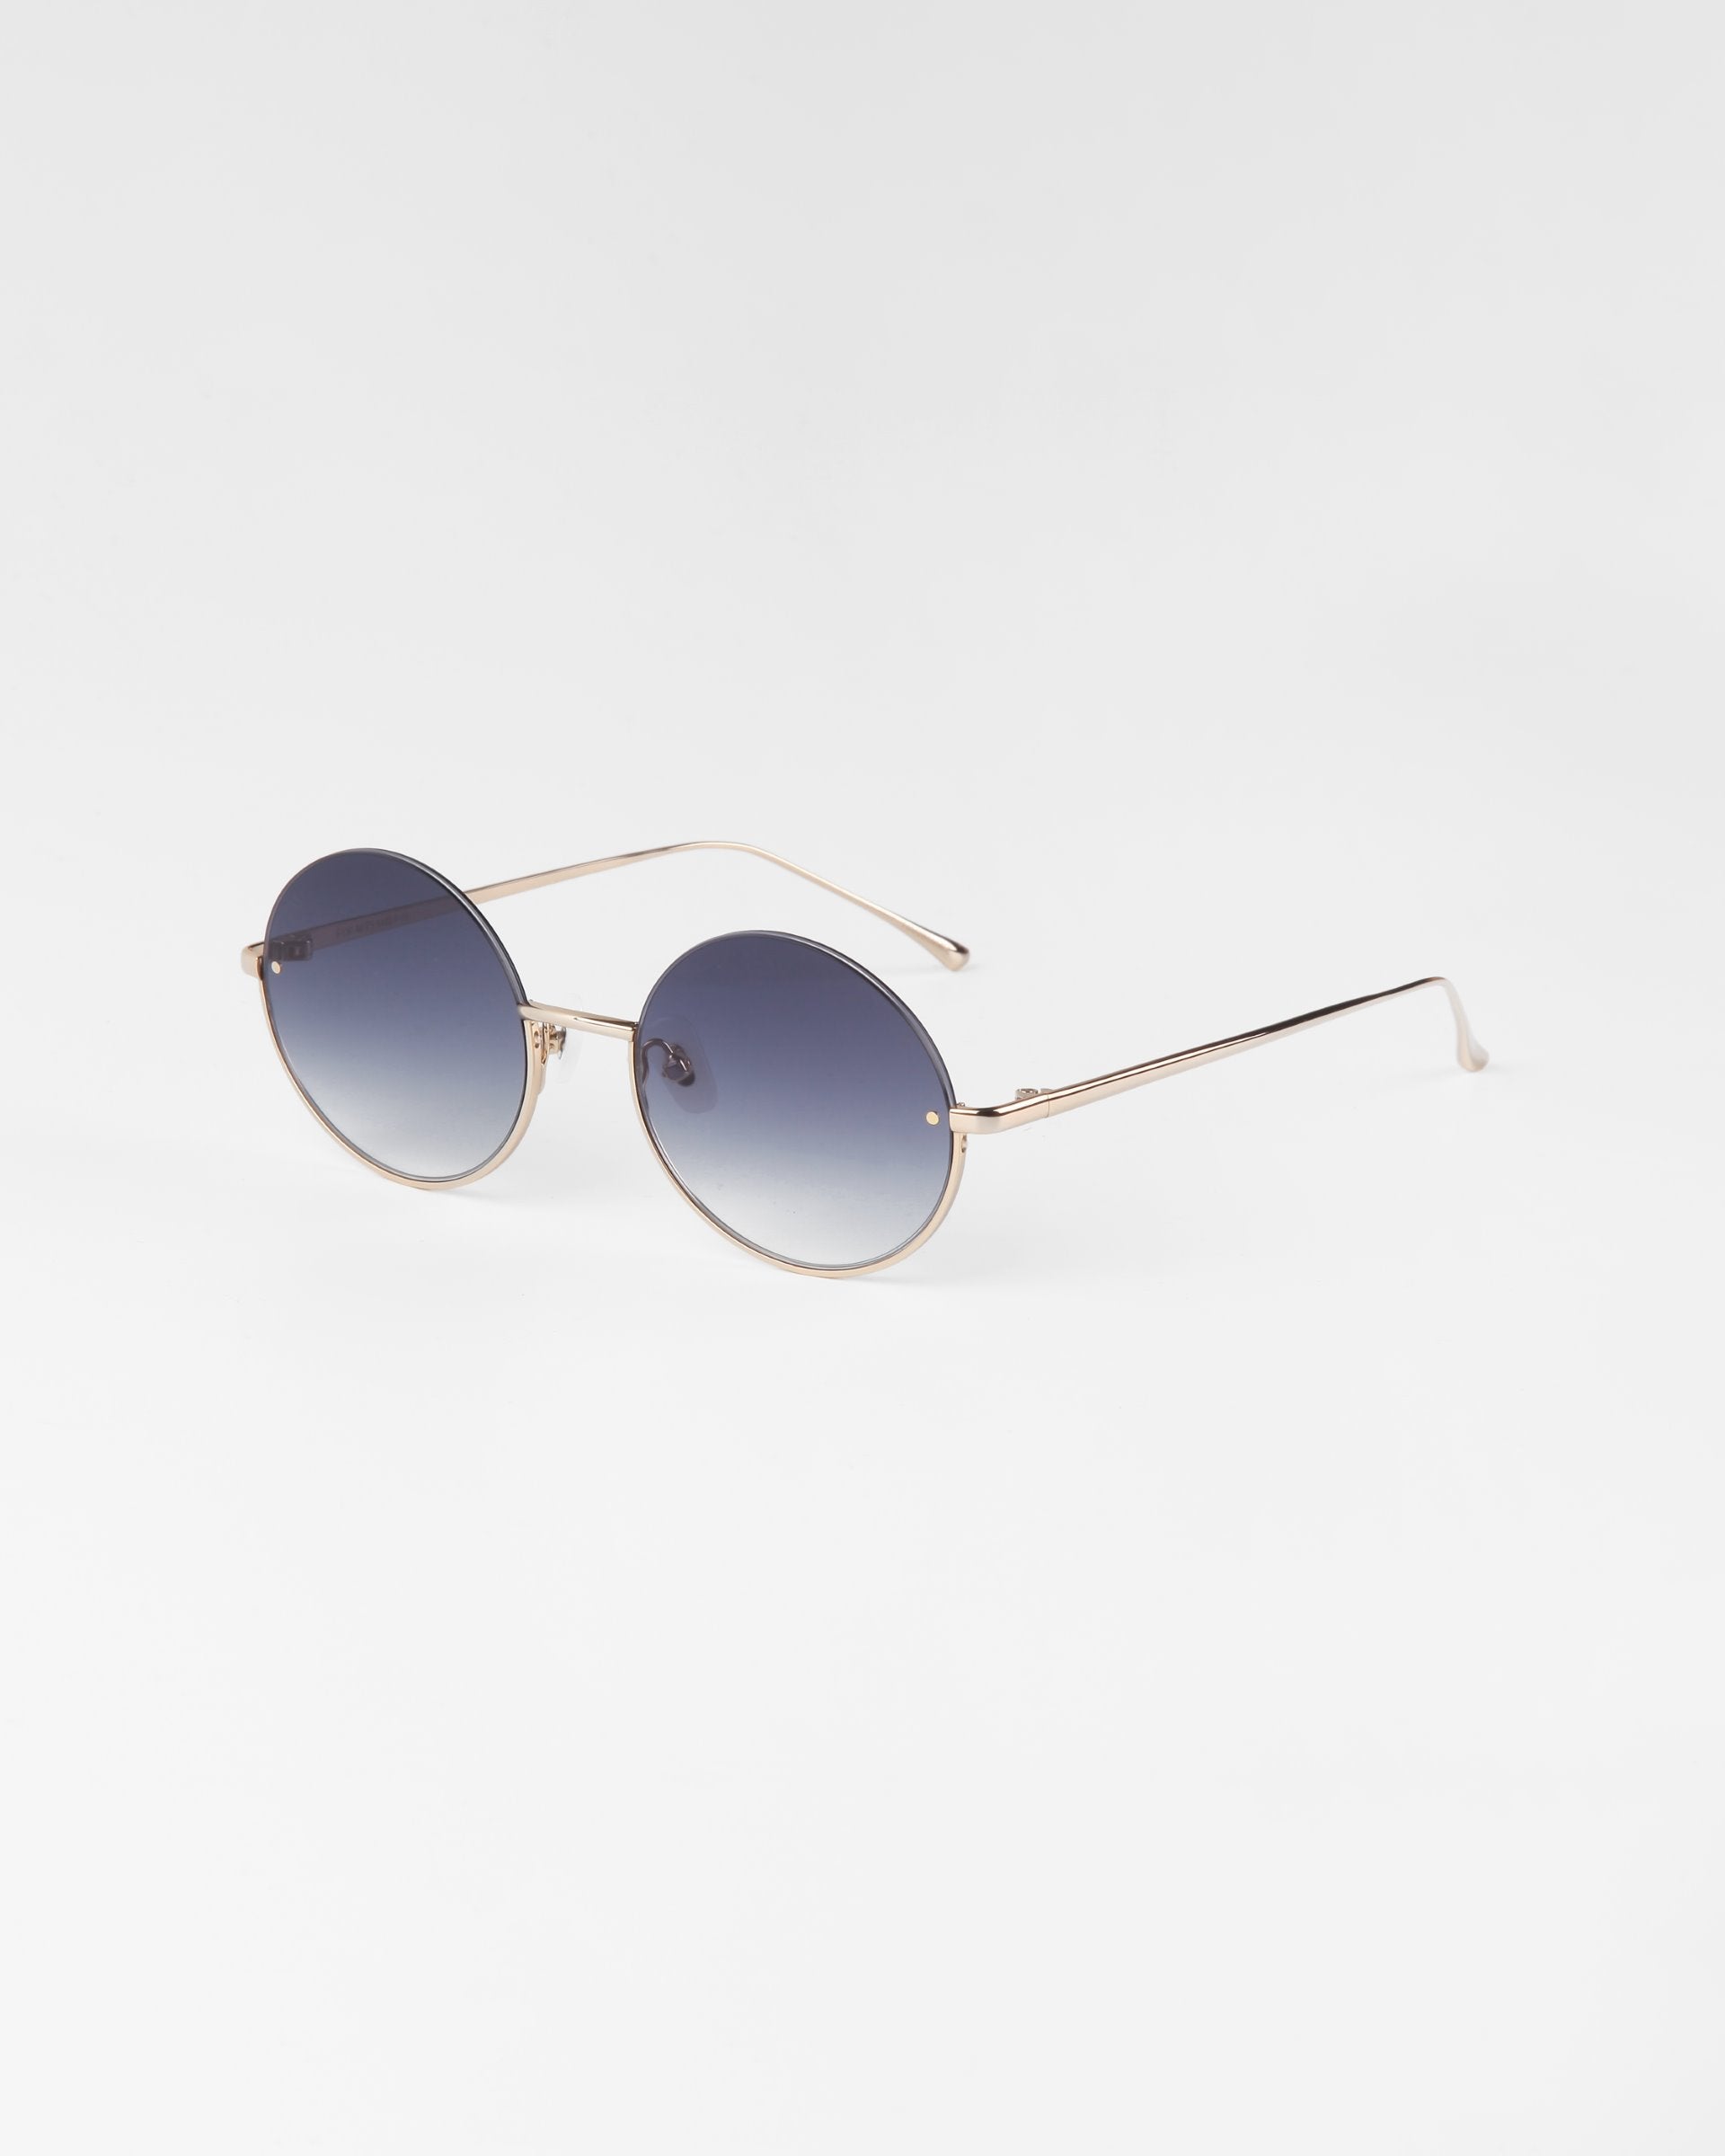 Skyline sunglasses by For Art&#39;s Sake® with 18-karat gold plated frames and gradient blue-tinted lenses. The thin arms of the glasses match the luxurious gold frame, creating a stylish and modern look. The background is a plain white surface.